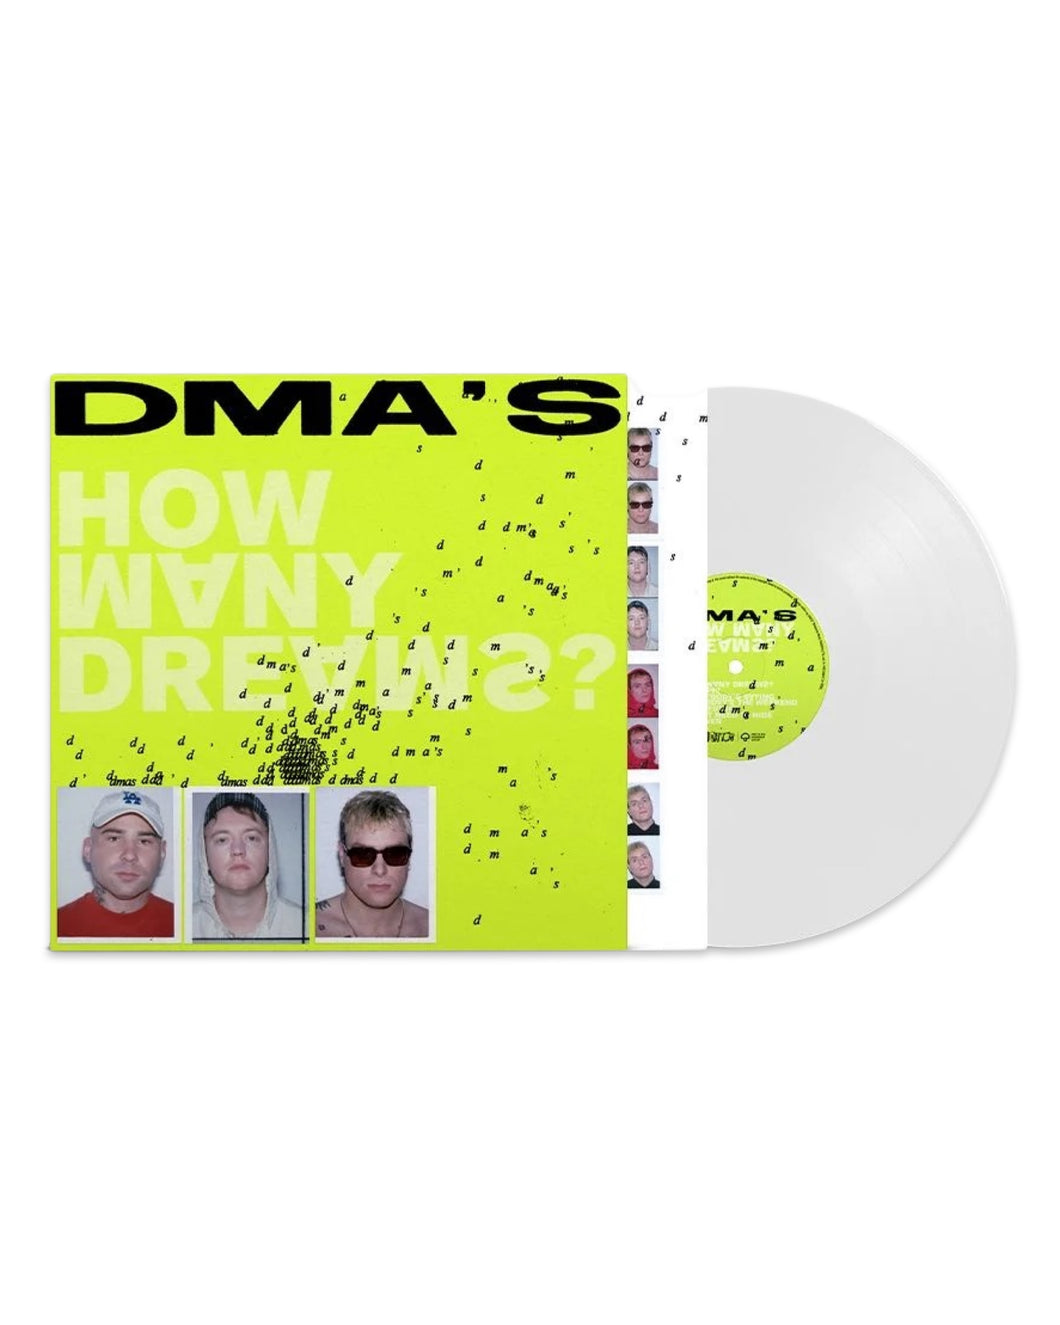 How Many Dreams? Limited Edition White Vinyl + Signed Sleeve